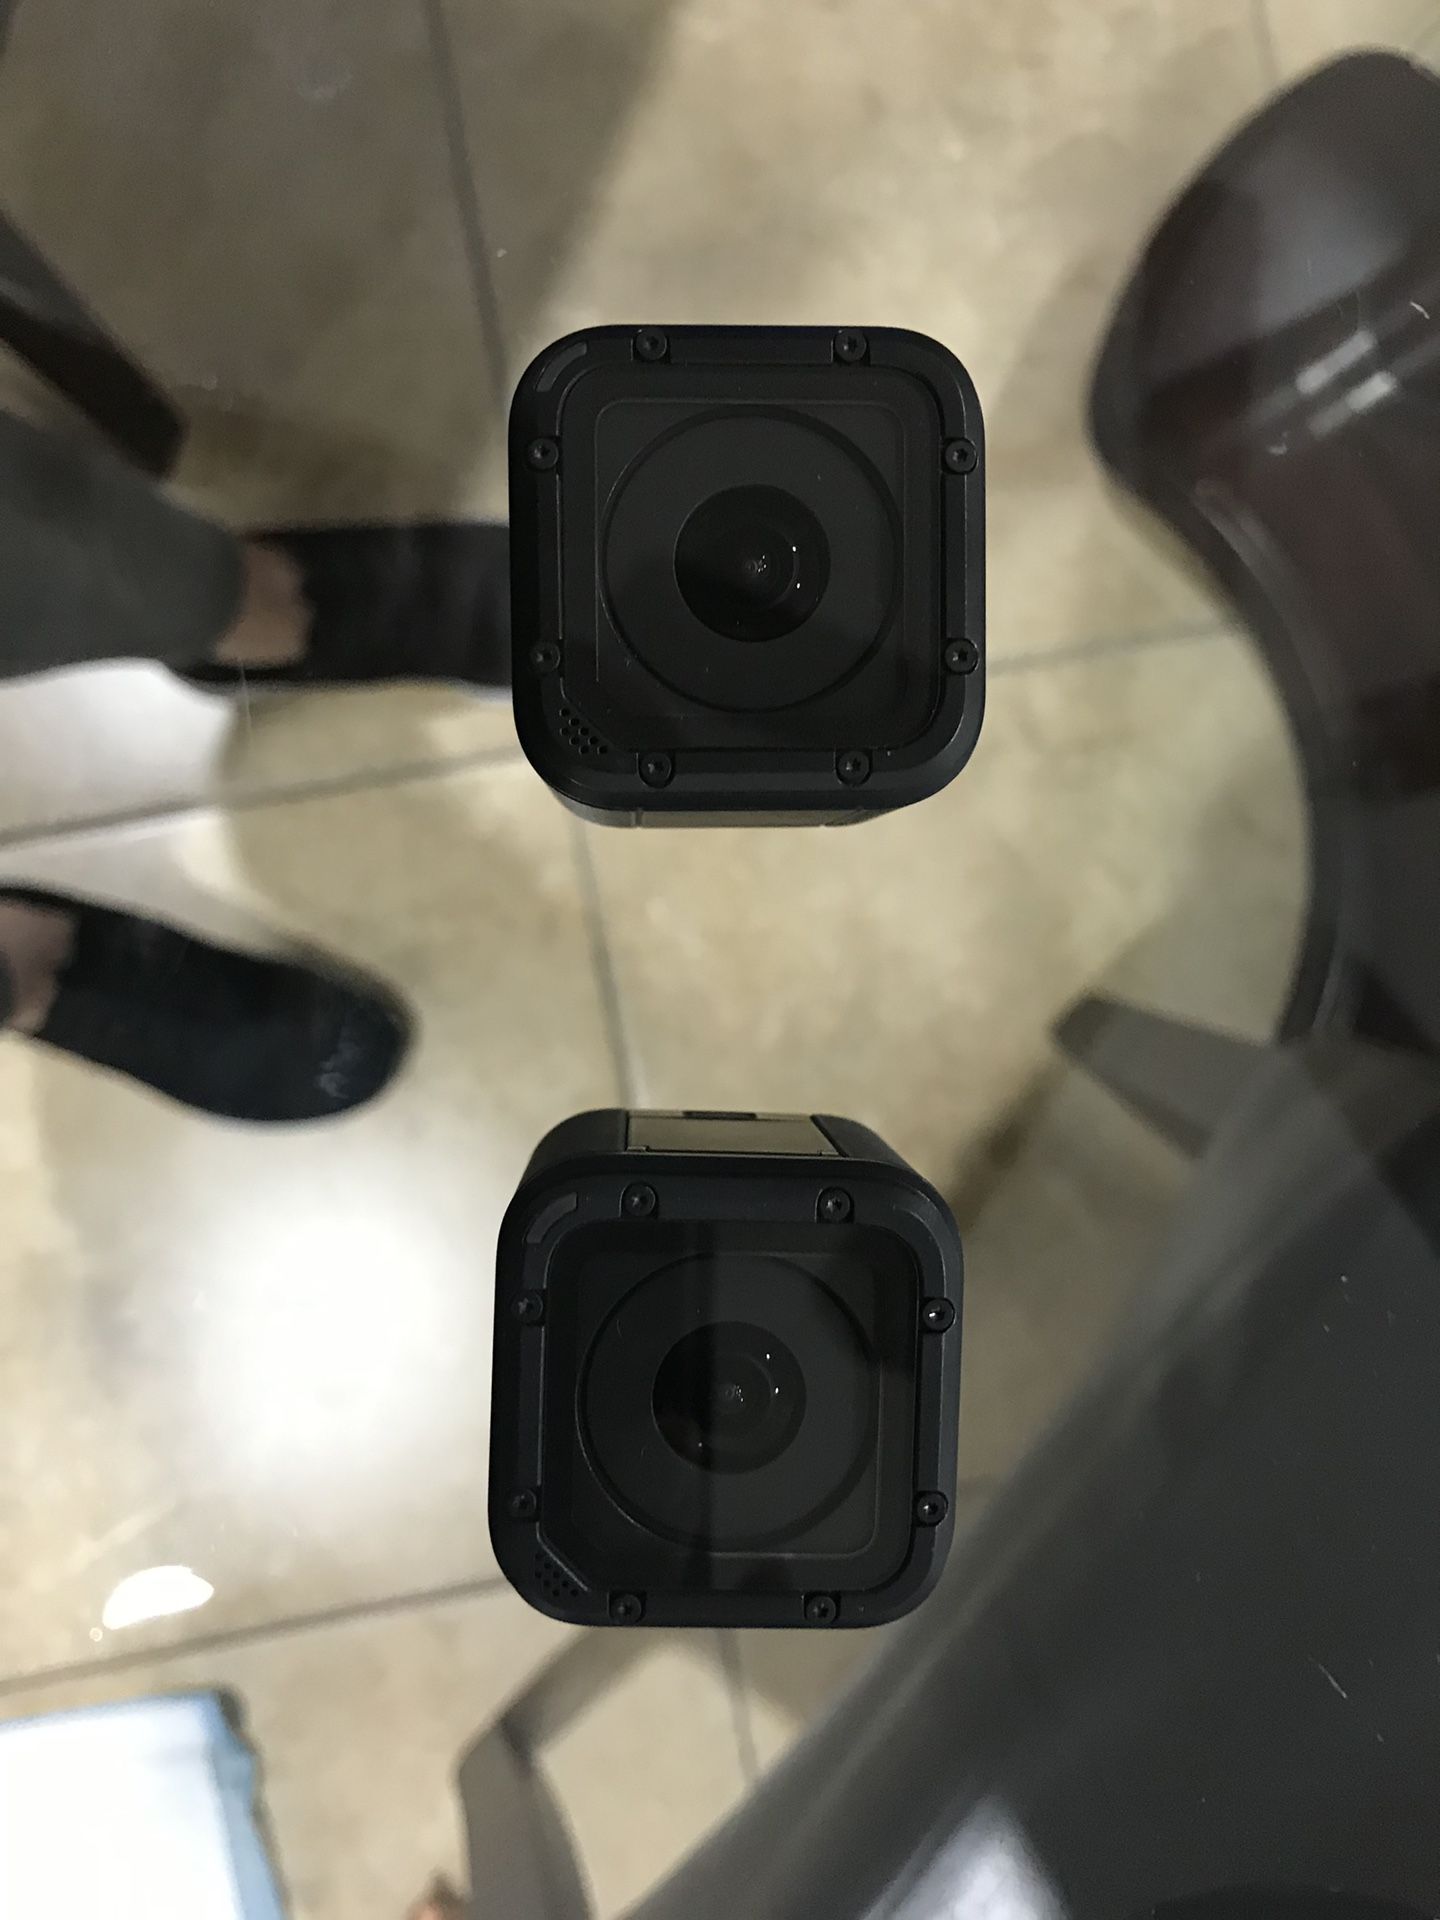 Cameras Go Pro Hero 4 with covers and equipment